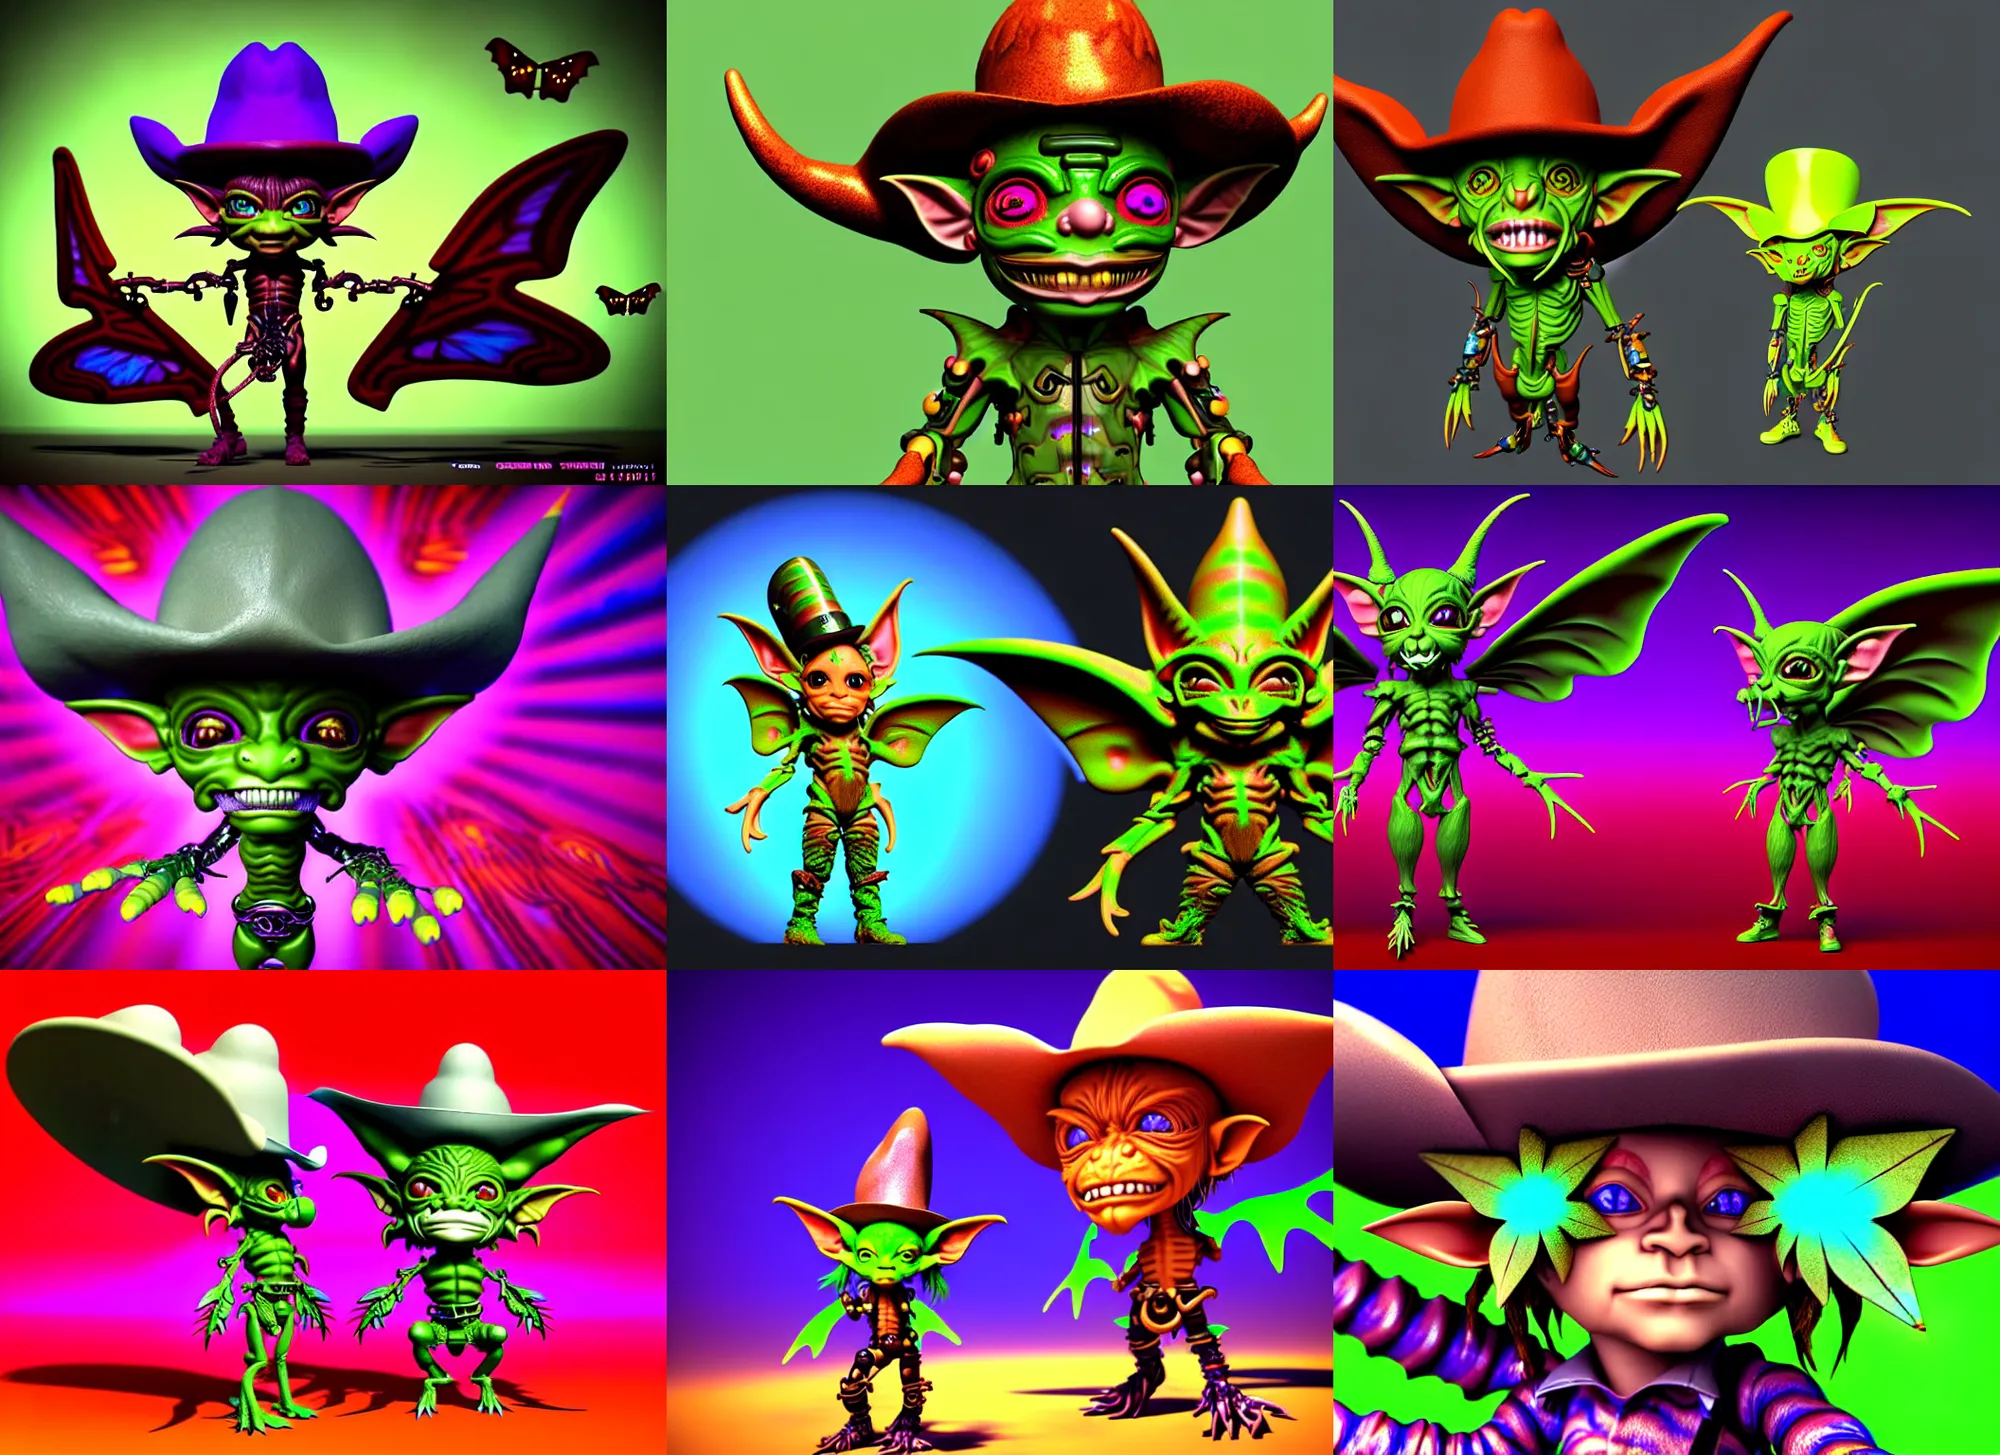 Prompt: 3 d render of chibi cyborg goblin elf by ichiro tanida wearing a big cowboy hat and wearing angel wings against a psychedelic swirly background with 3 d butterflies and 3 d flowers n the style of 1 9 9 0's cg graphics 3 d rendered y 2 k aesthetic by ichiro tanida, 3 do magazine